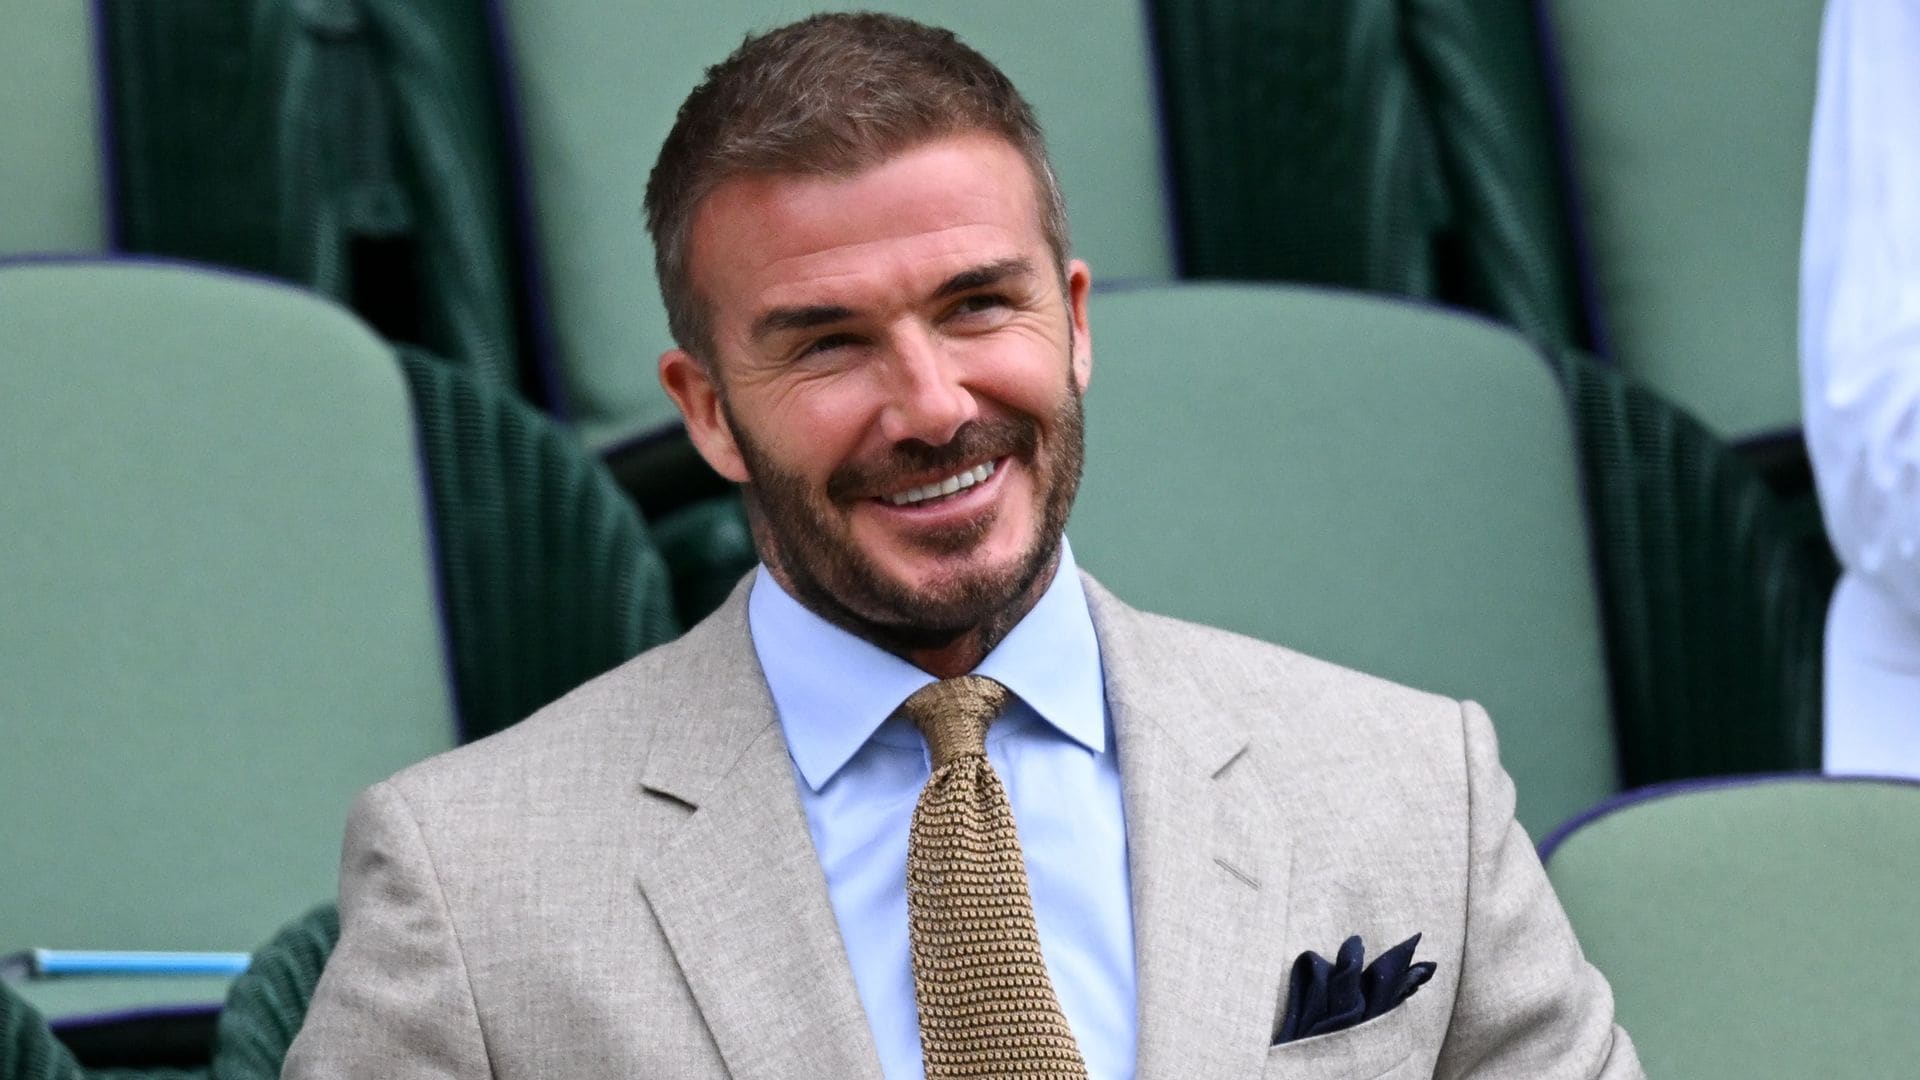 David Beckham shows off strong biceps in family vacation with Victoria Beckham